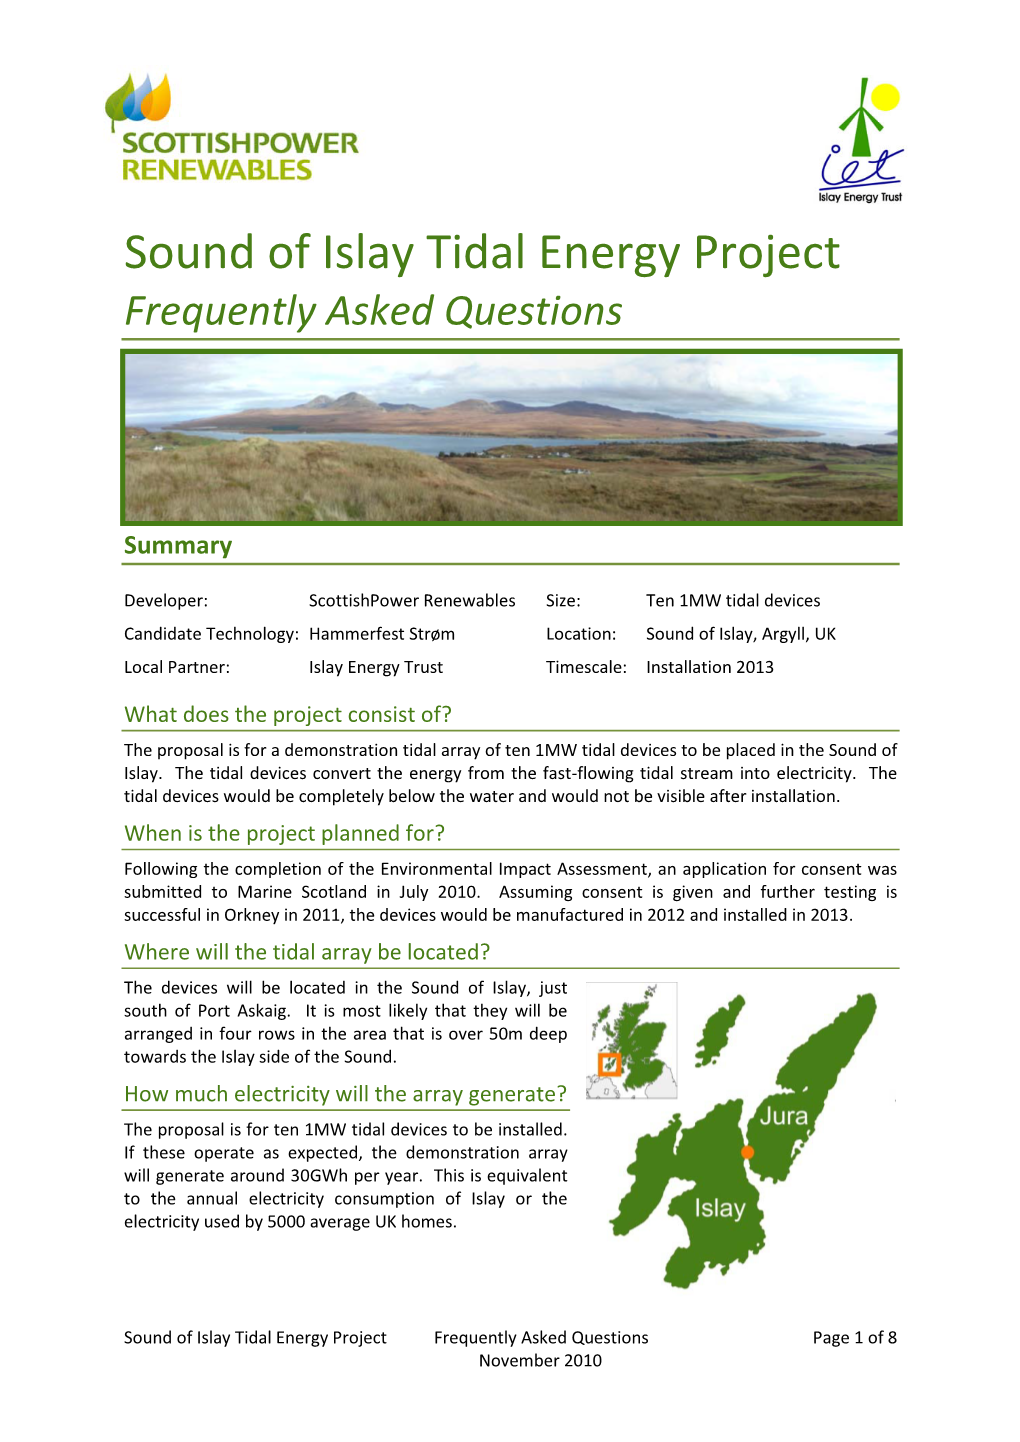 Sound of Islay Tidal Energy Project Frequently Asked Questions